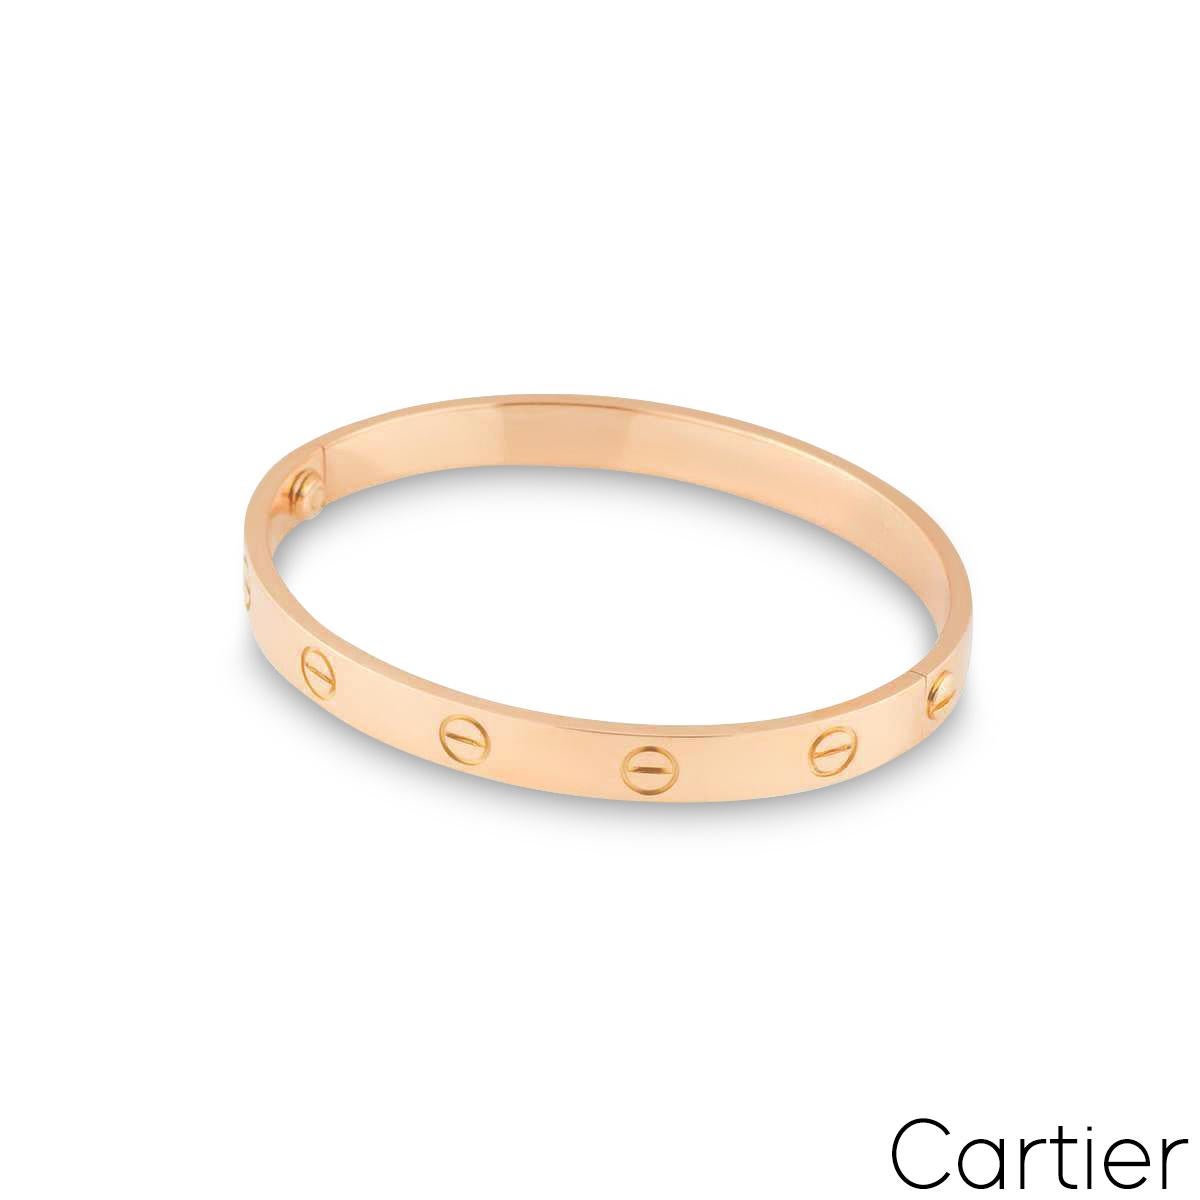 A signature 18k rose gold Cartier plain bracelet from the Love collection. The bracelet has the iconic screw motif displayed around the outer side of the bangle and has the old style screw fitting. The bracelet is a size 16 and has a gross weight of